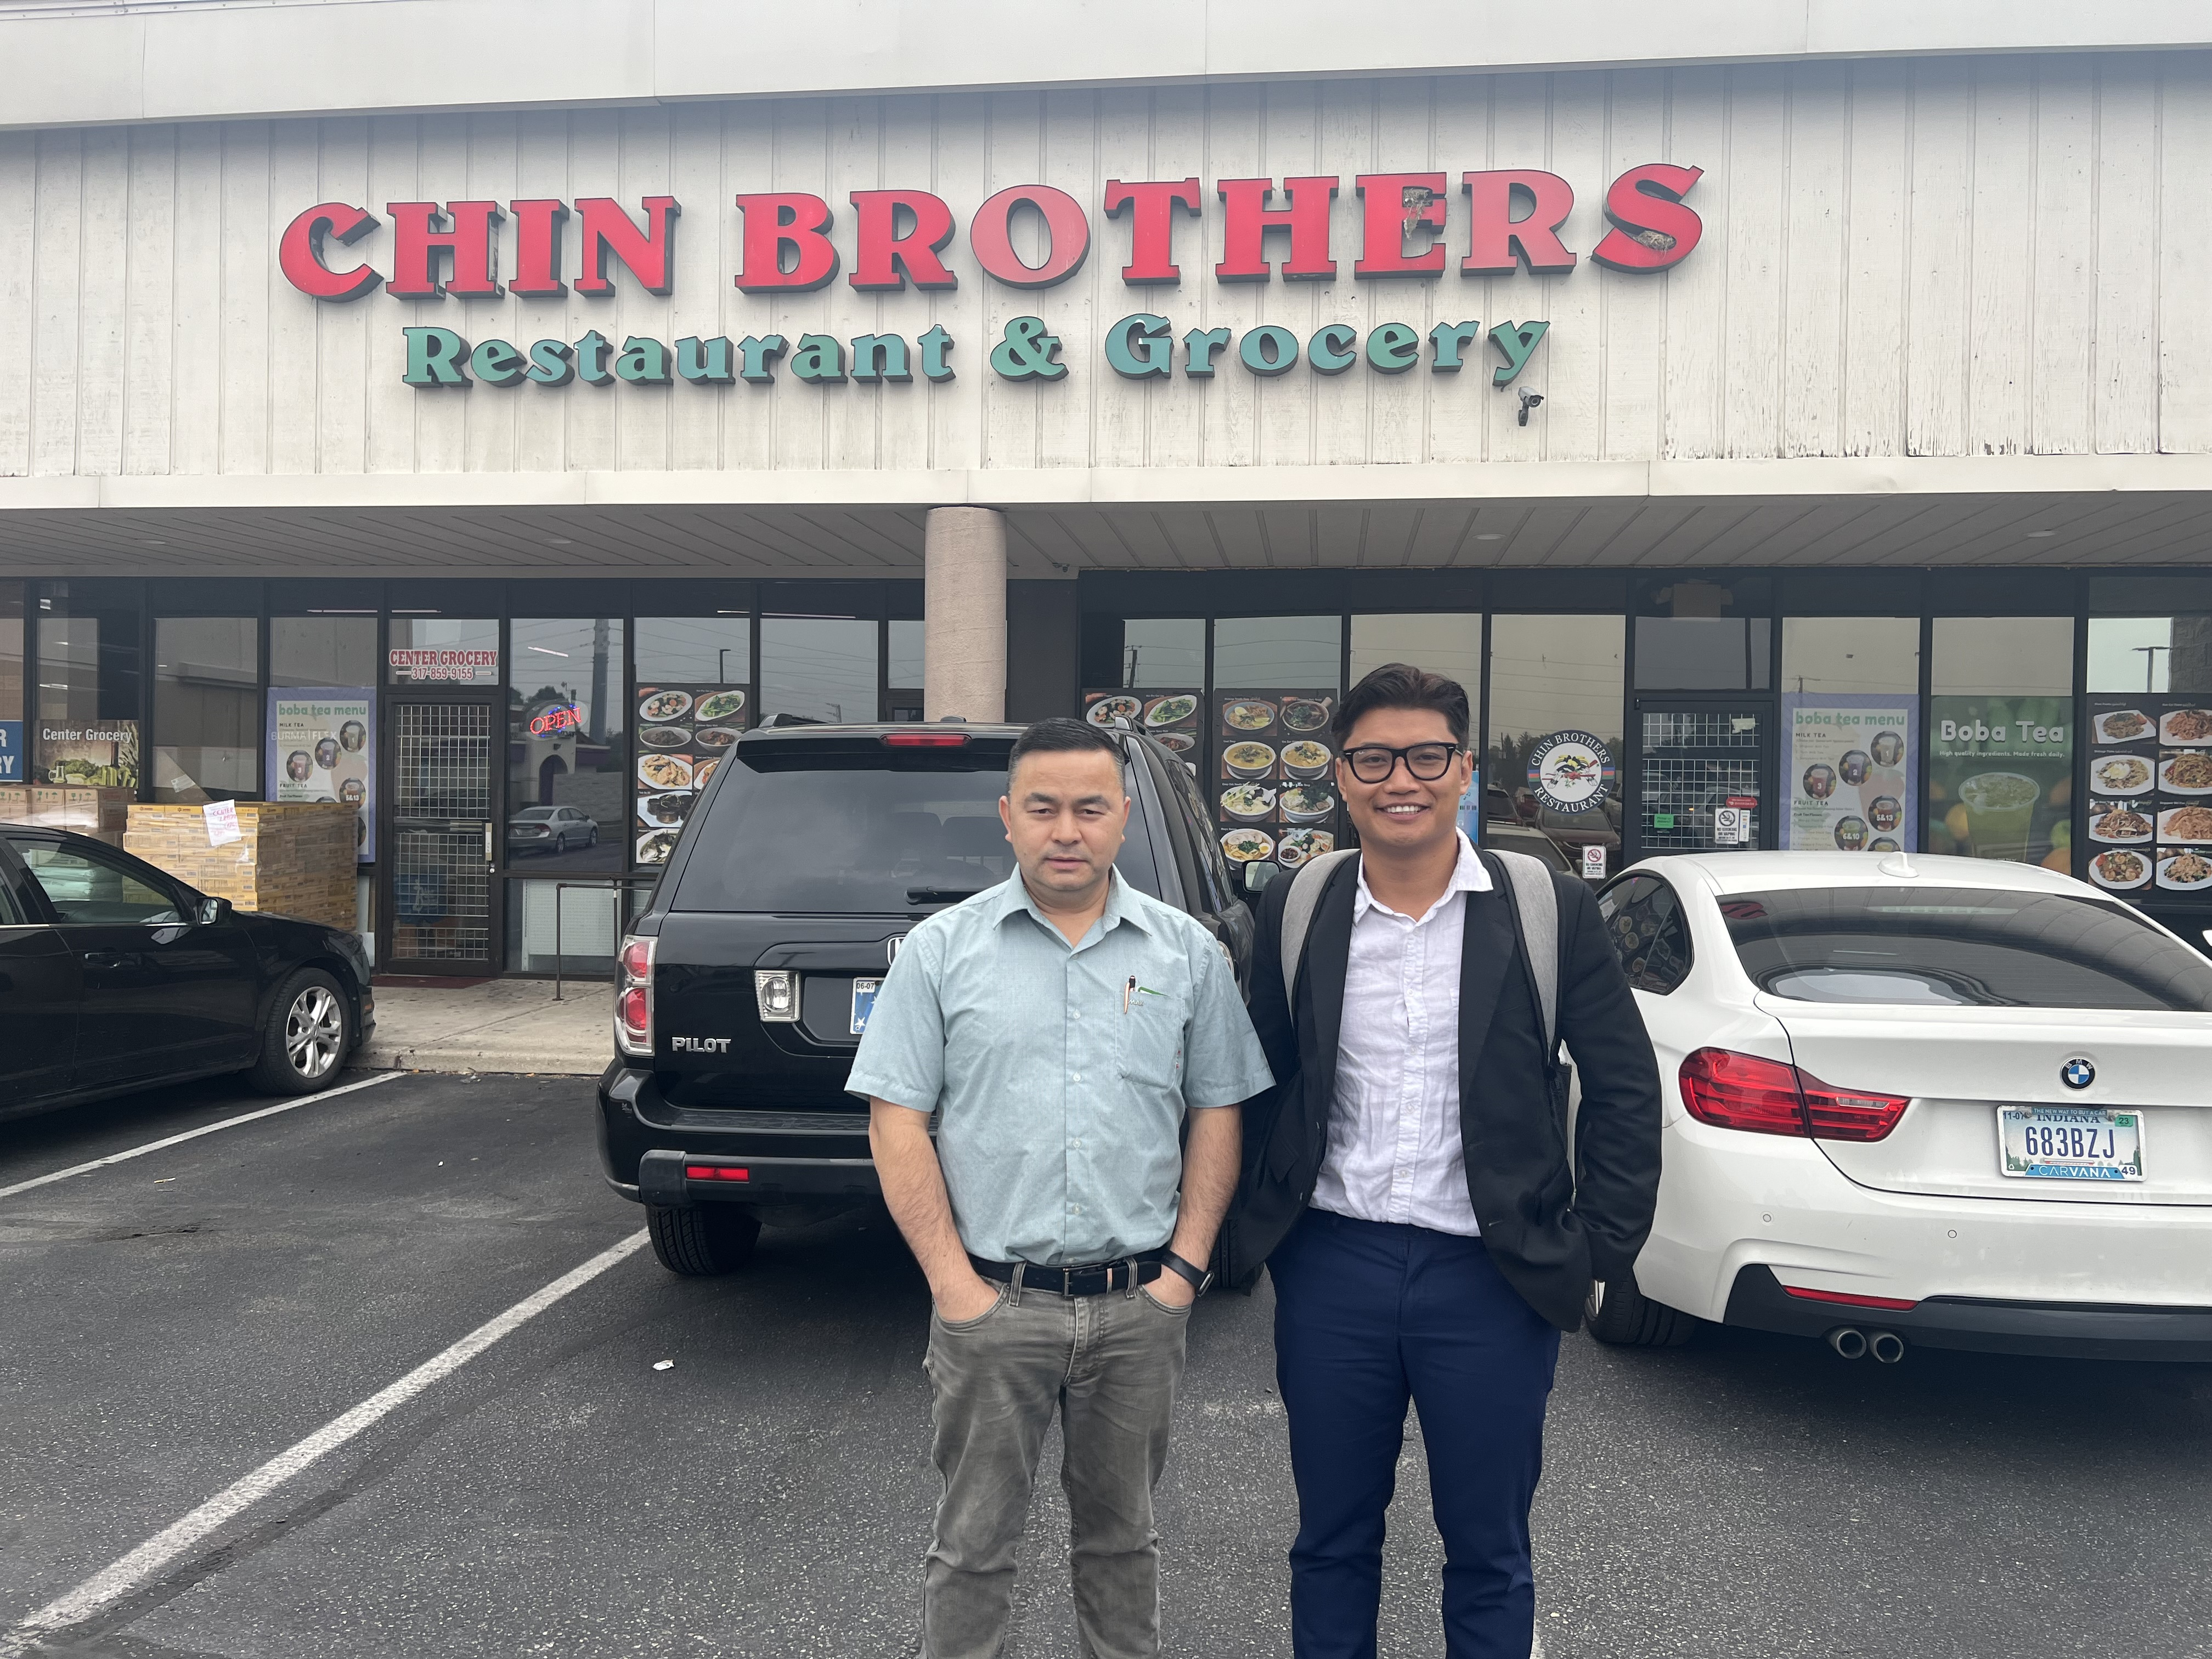 Left: Than Hre, the owner of Chin Brothers Restaurant and Grocery. Right, the author after a conversation with Than Hre.